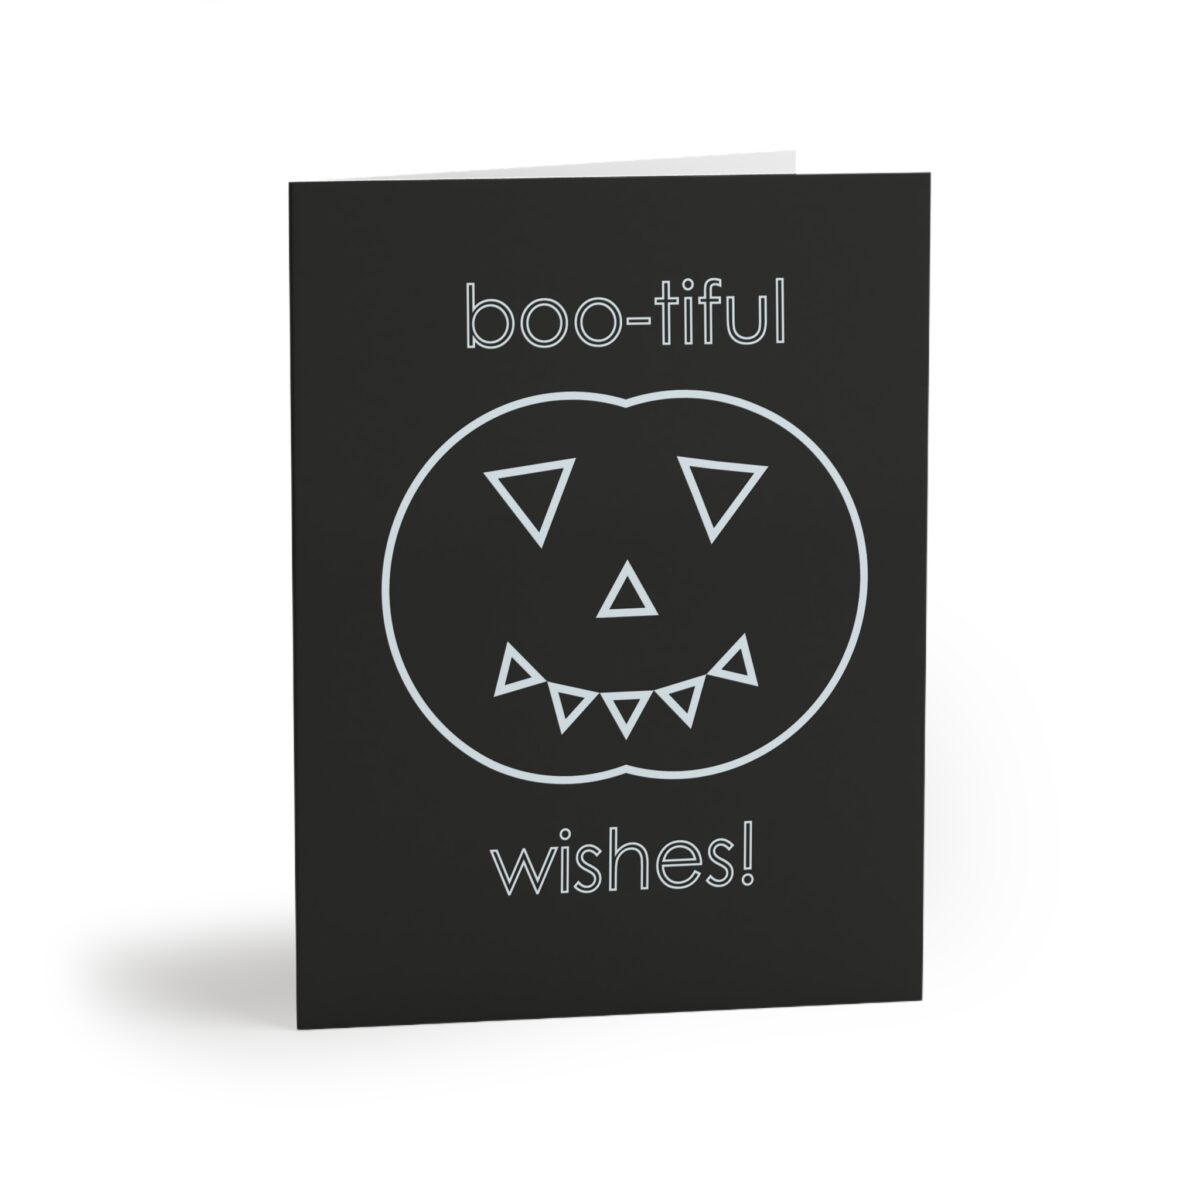 Boo-tiful wishes Pumpkin Card- View from the Front